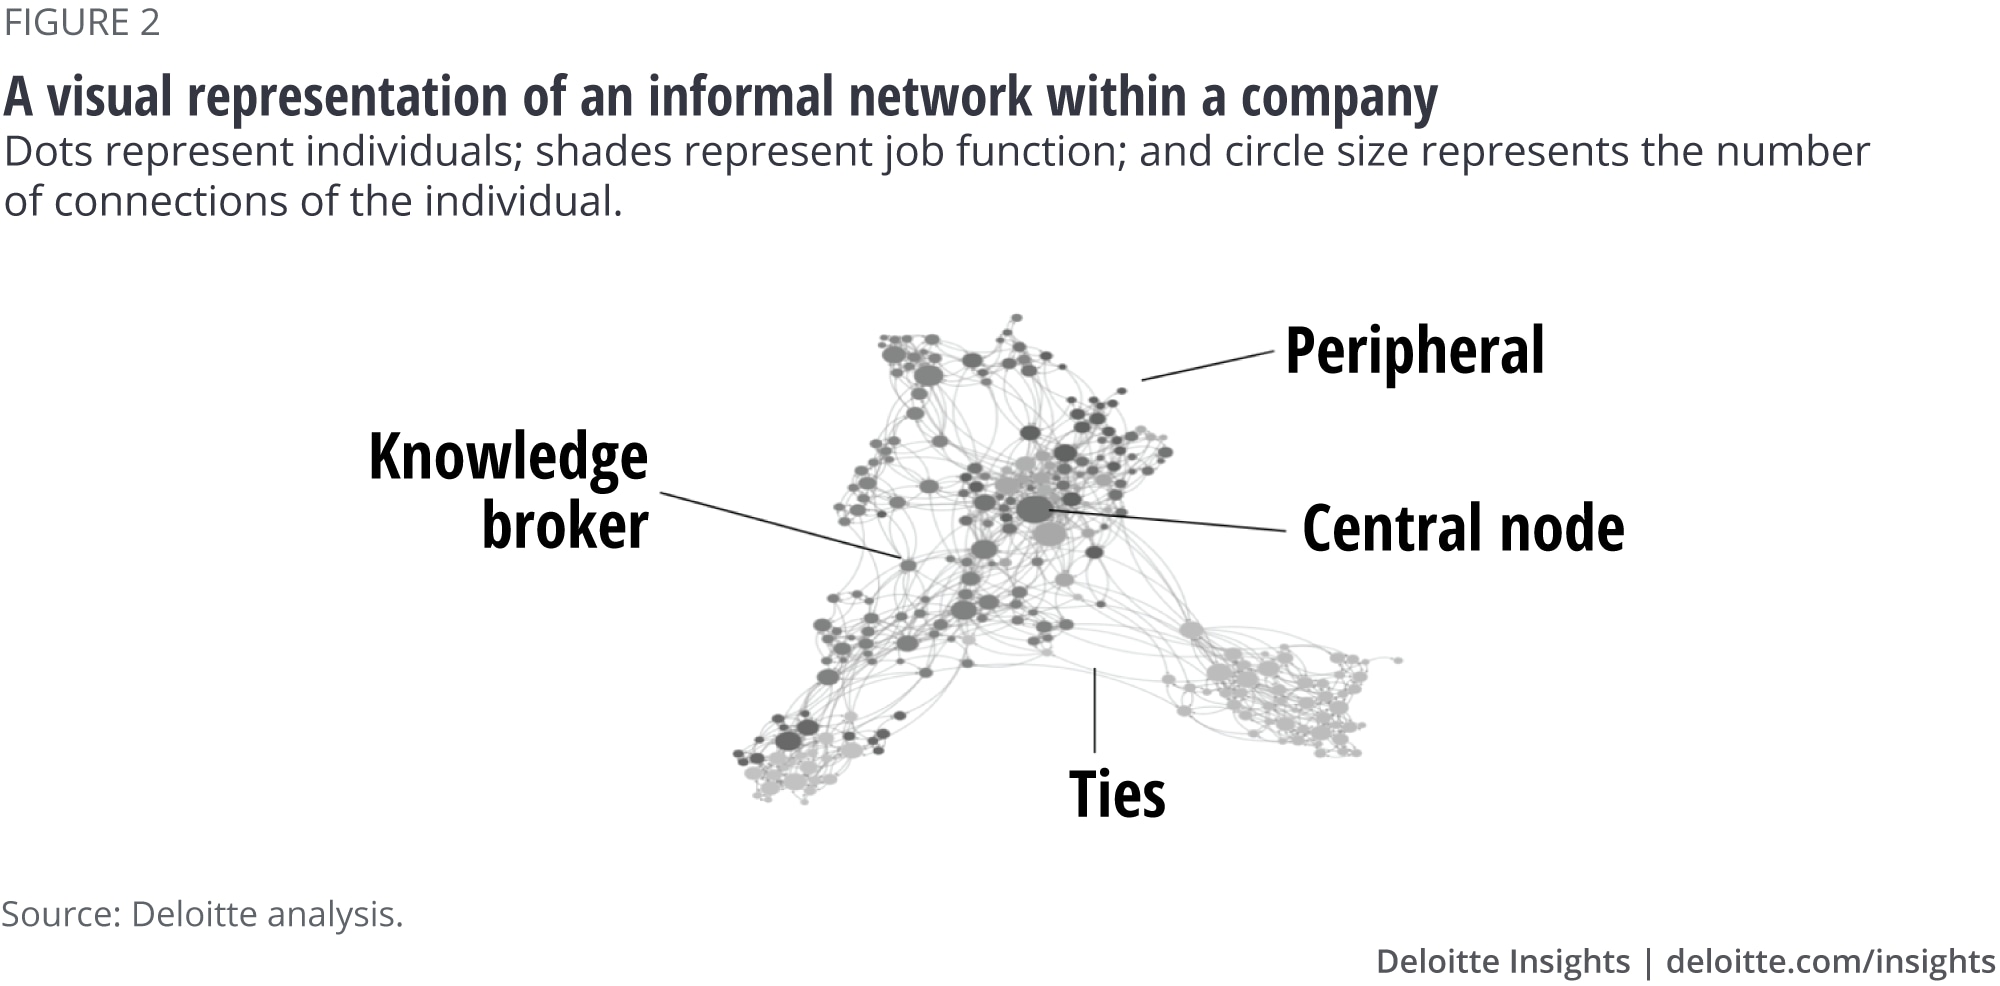 A visual representation of an informal network within a company